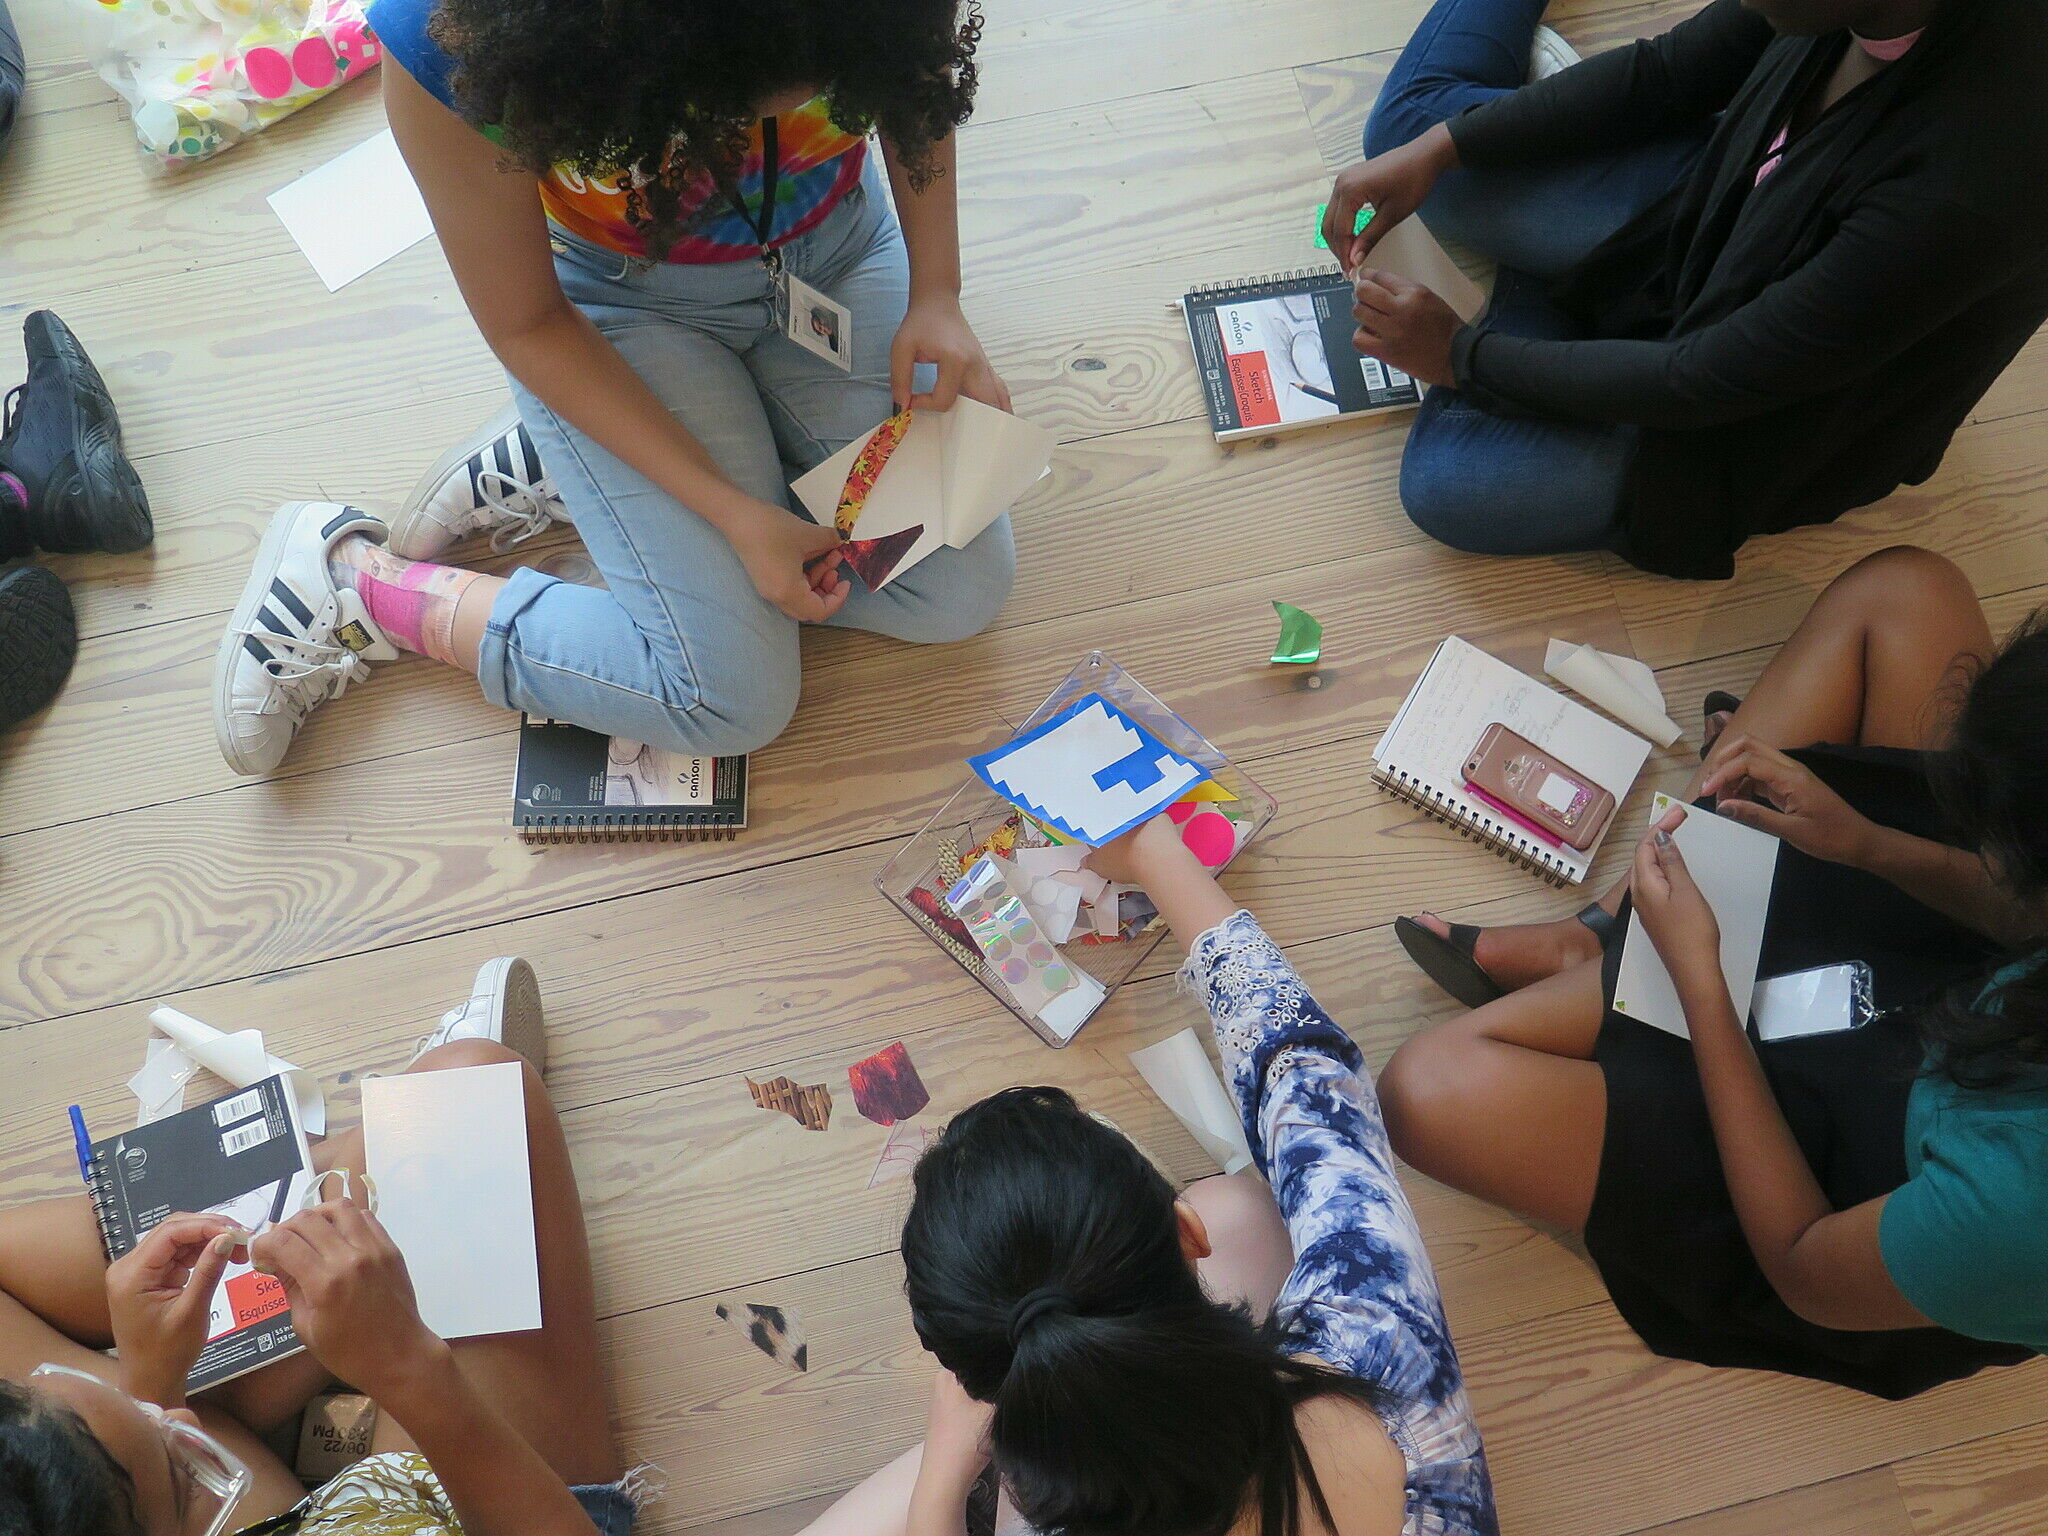 teens sitting on the floor with art supplies